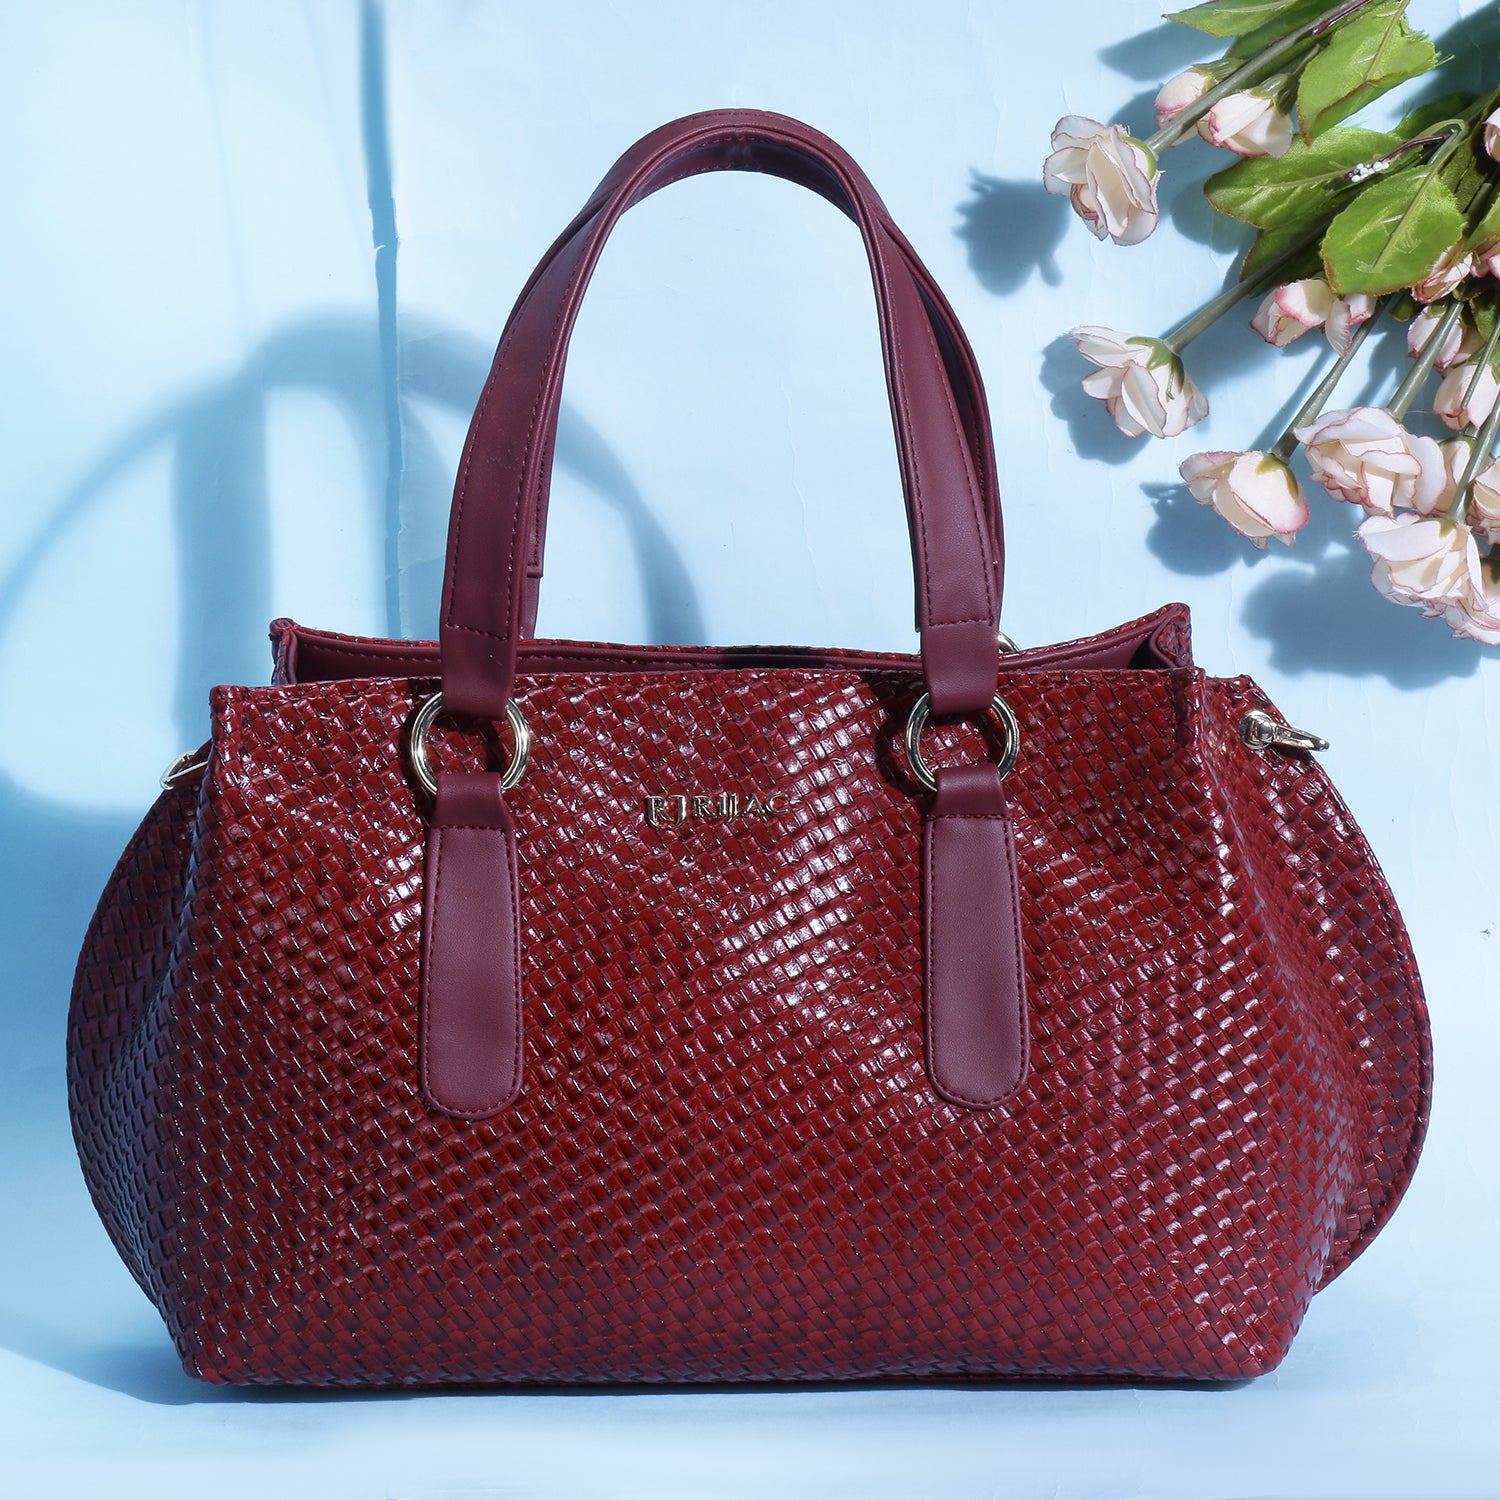 A red woven handbag on a blue background.